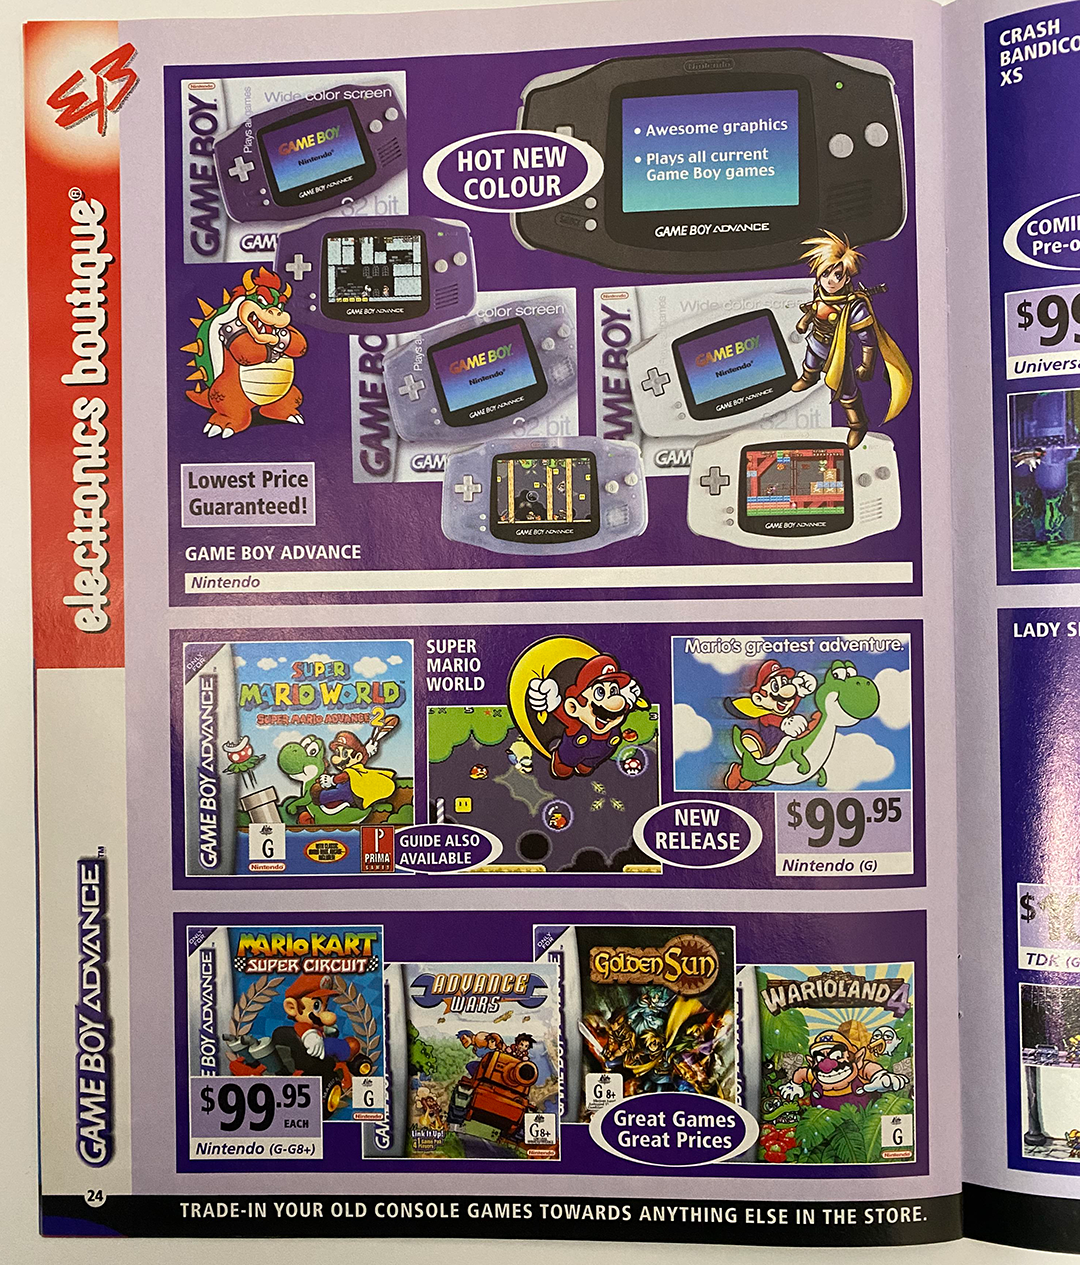 Advertising about computer games like Super Mario World, Golden Sun and Marioland. 